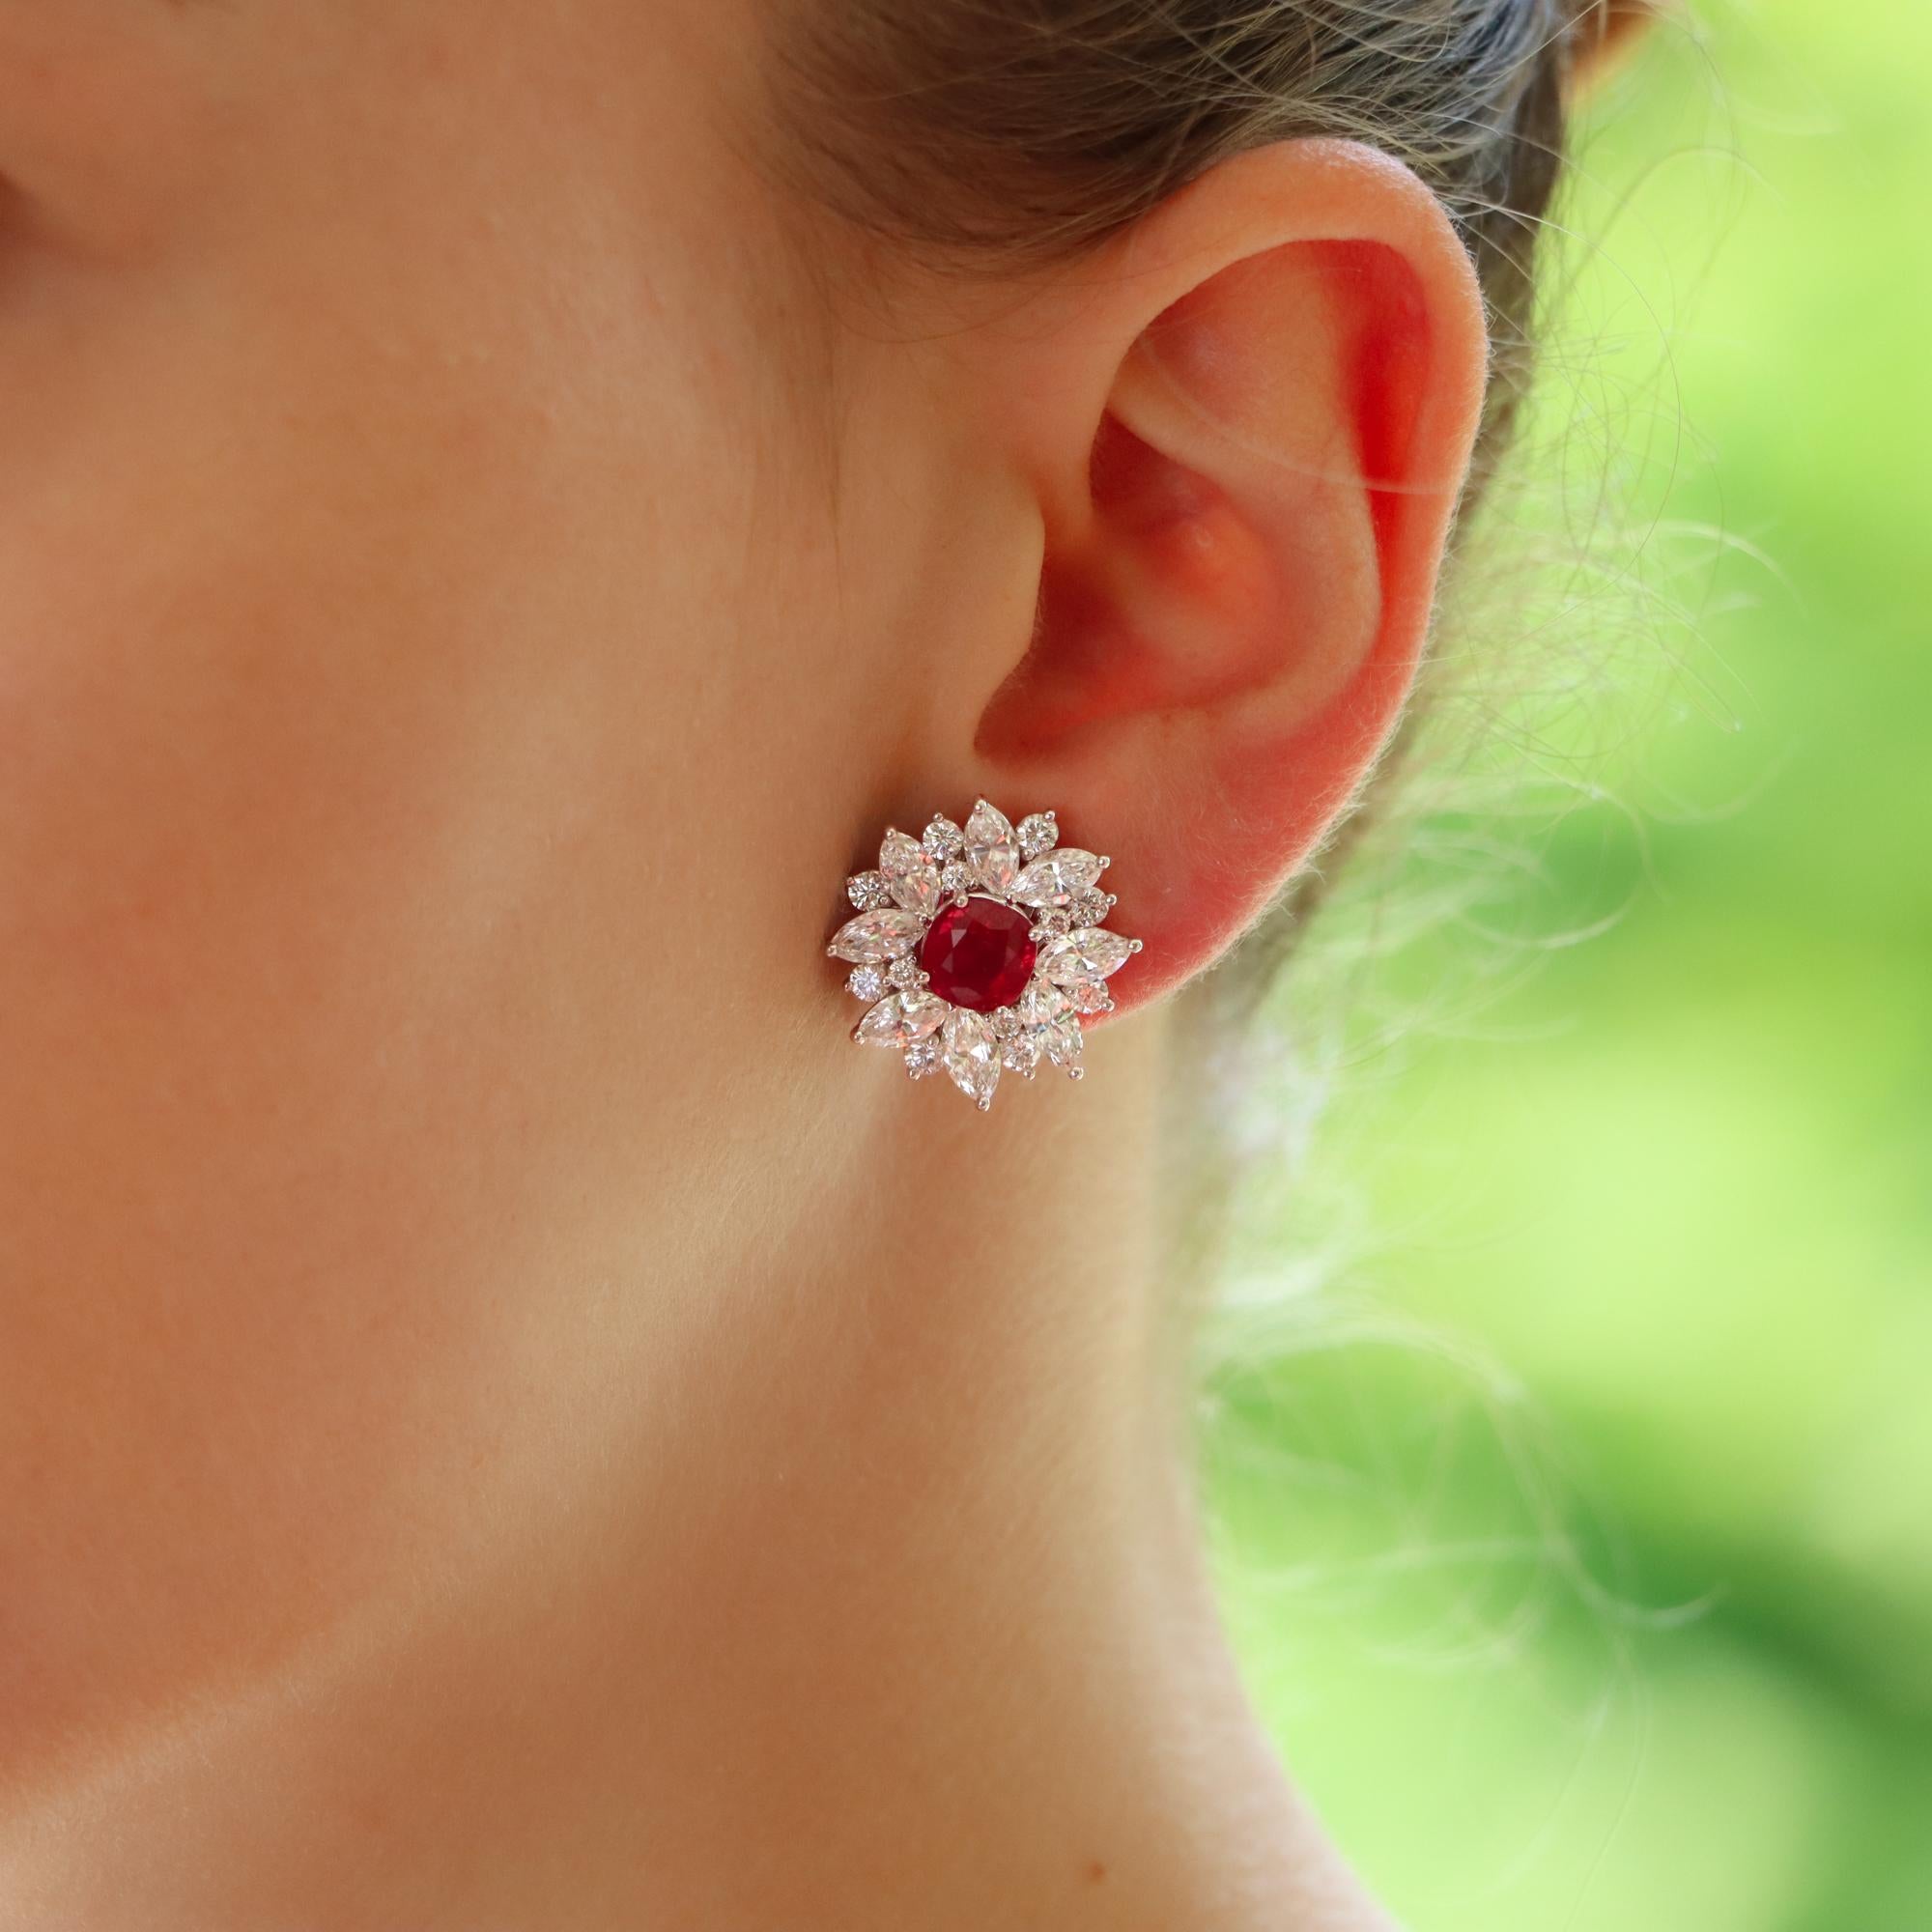 A spectacular pair of vibrant red ruby and diamond cluster earrings set in platinum.

Each earring features a central vibrant red cushion cut ruby. Surrounding each ruby are 8 marquise and 14 round brilliant cut diamonds. All of the stones are claw